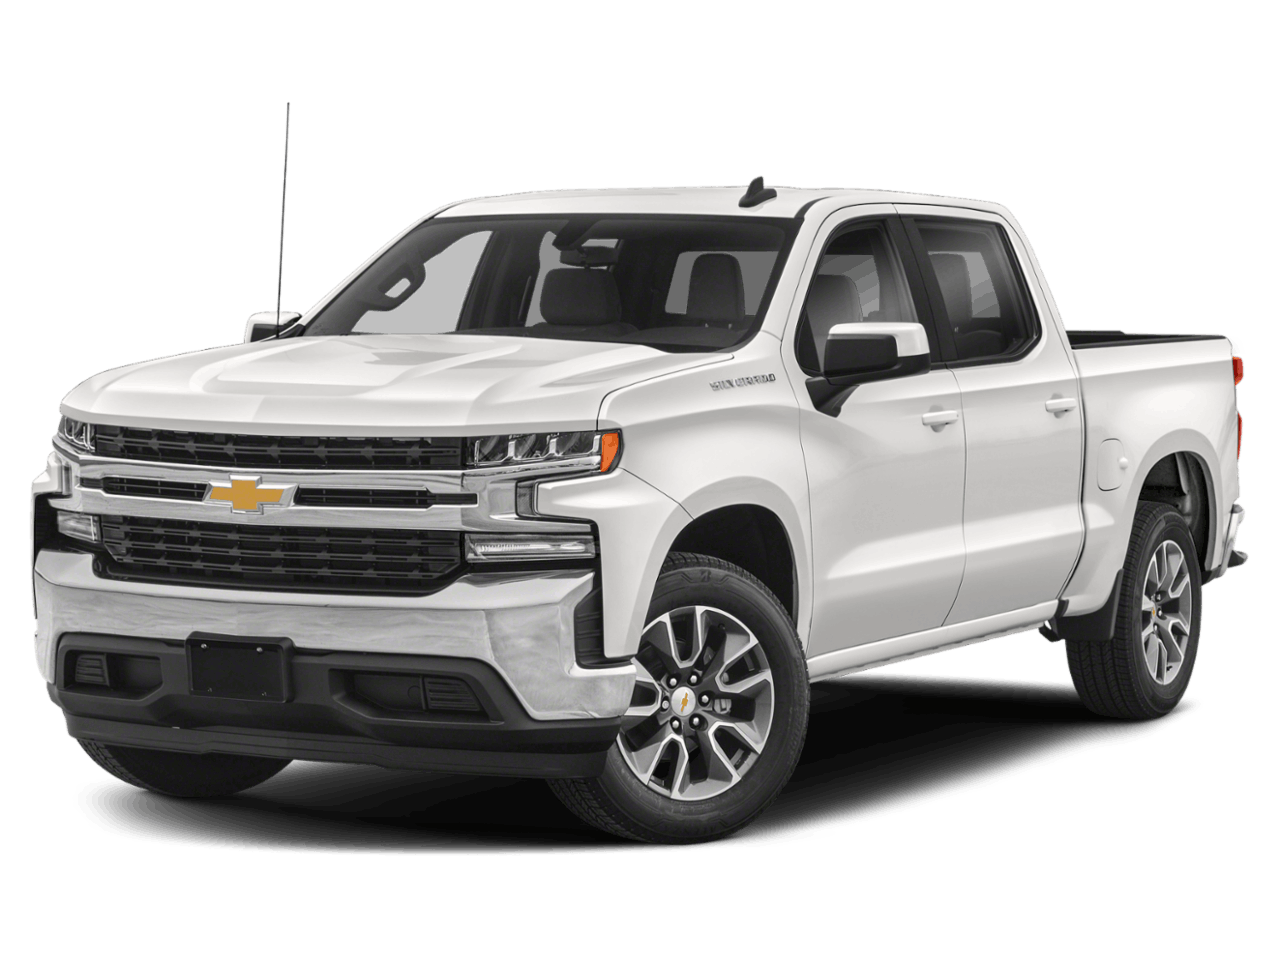 Used 2022 Chevrolet Silverado 1500 Limited LT with VIN 1GCUYDED1NZ225818 for sale in Waite Park, Minnesota